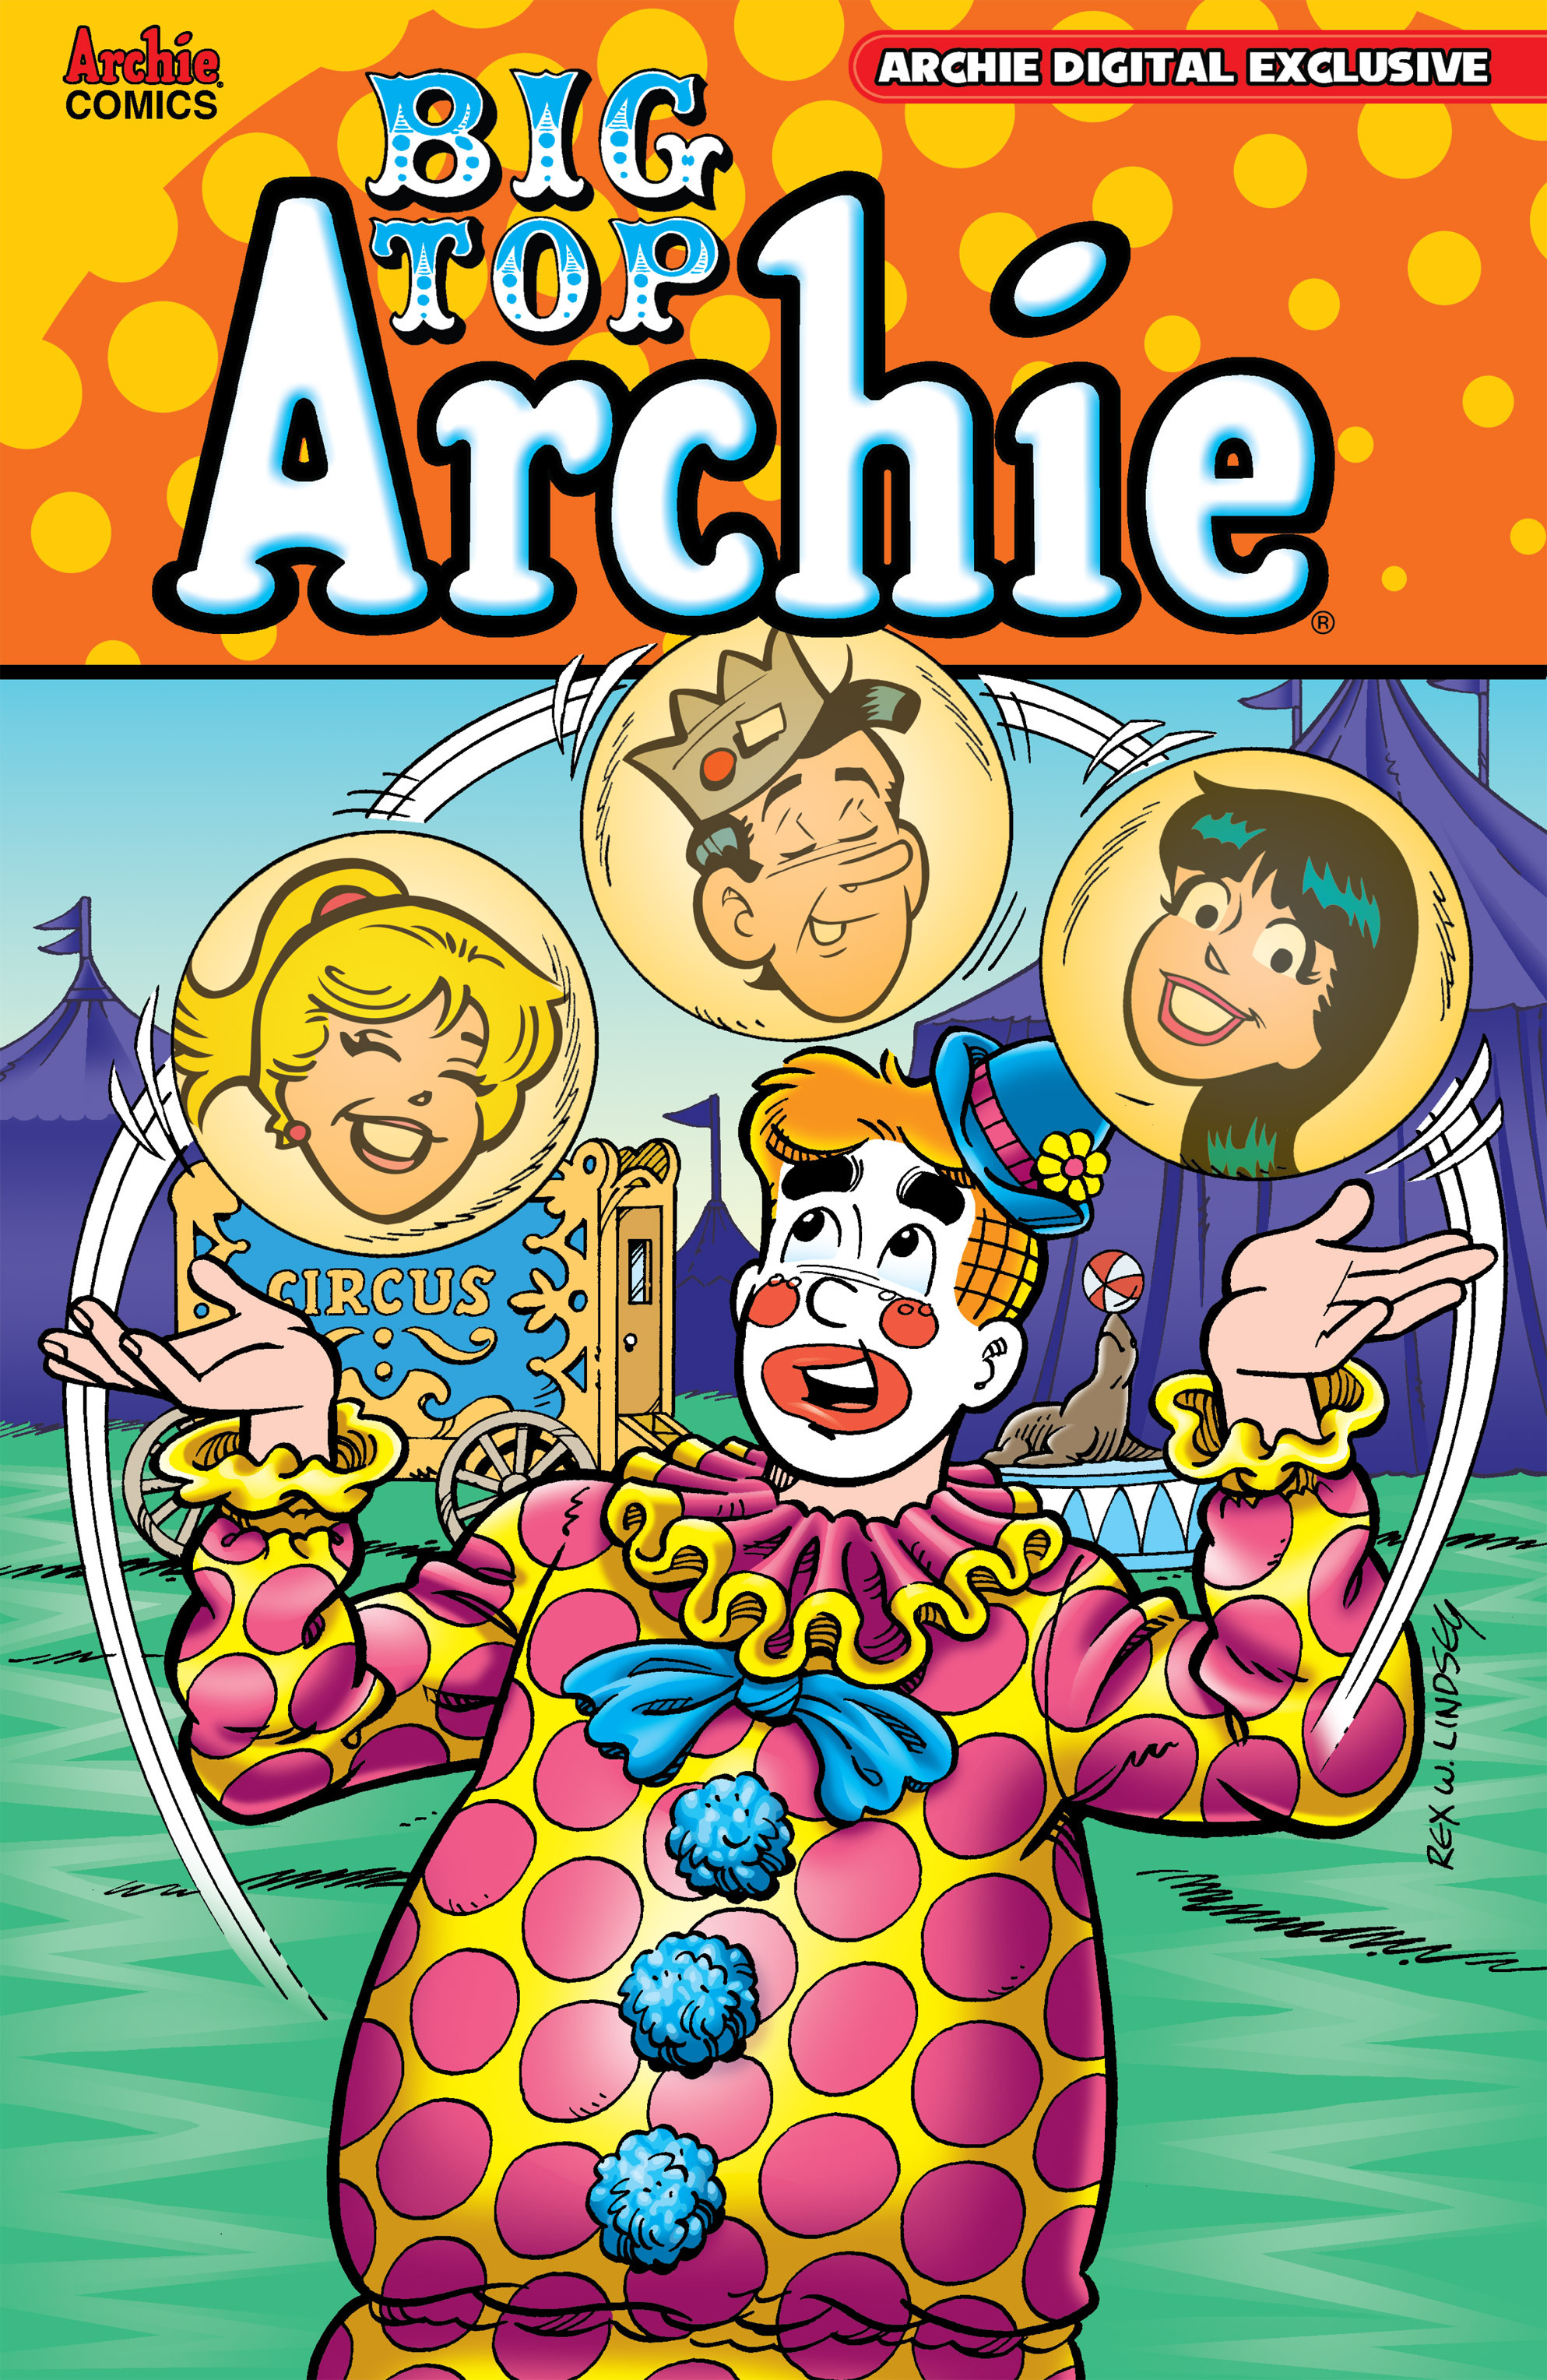 Read online Big Top Archie comic -  Issue # TPB - 1